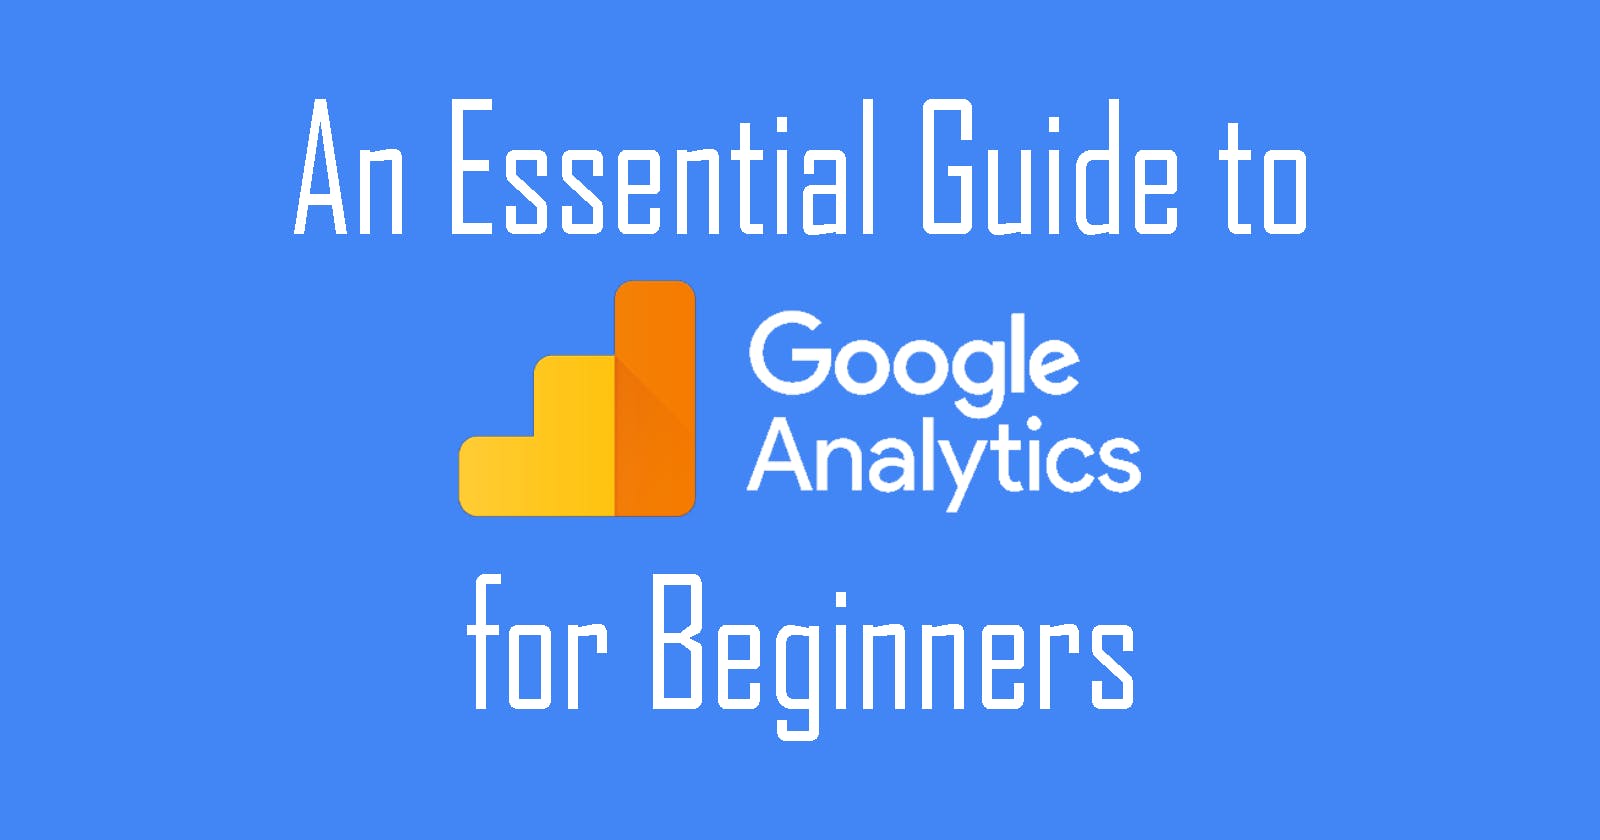 An Essential Guide to Grow your Website with Google Analytics